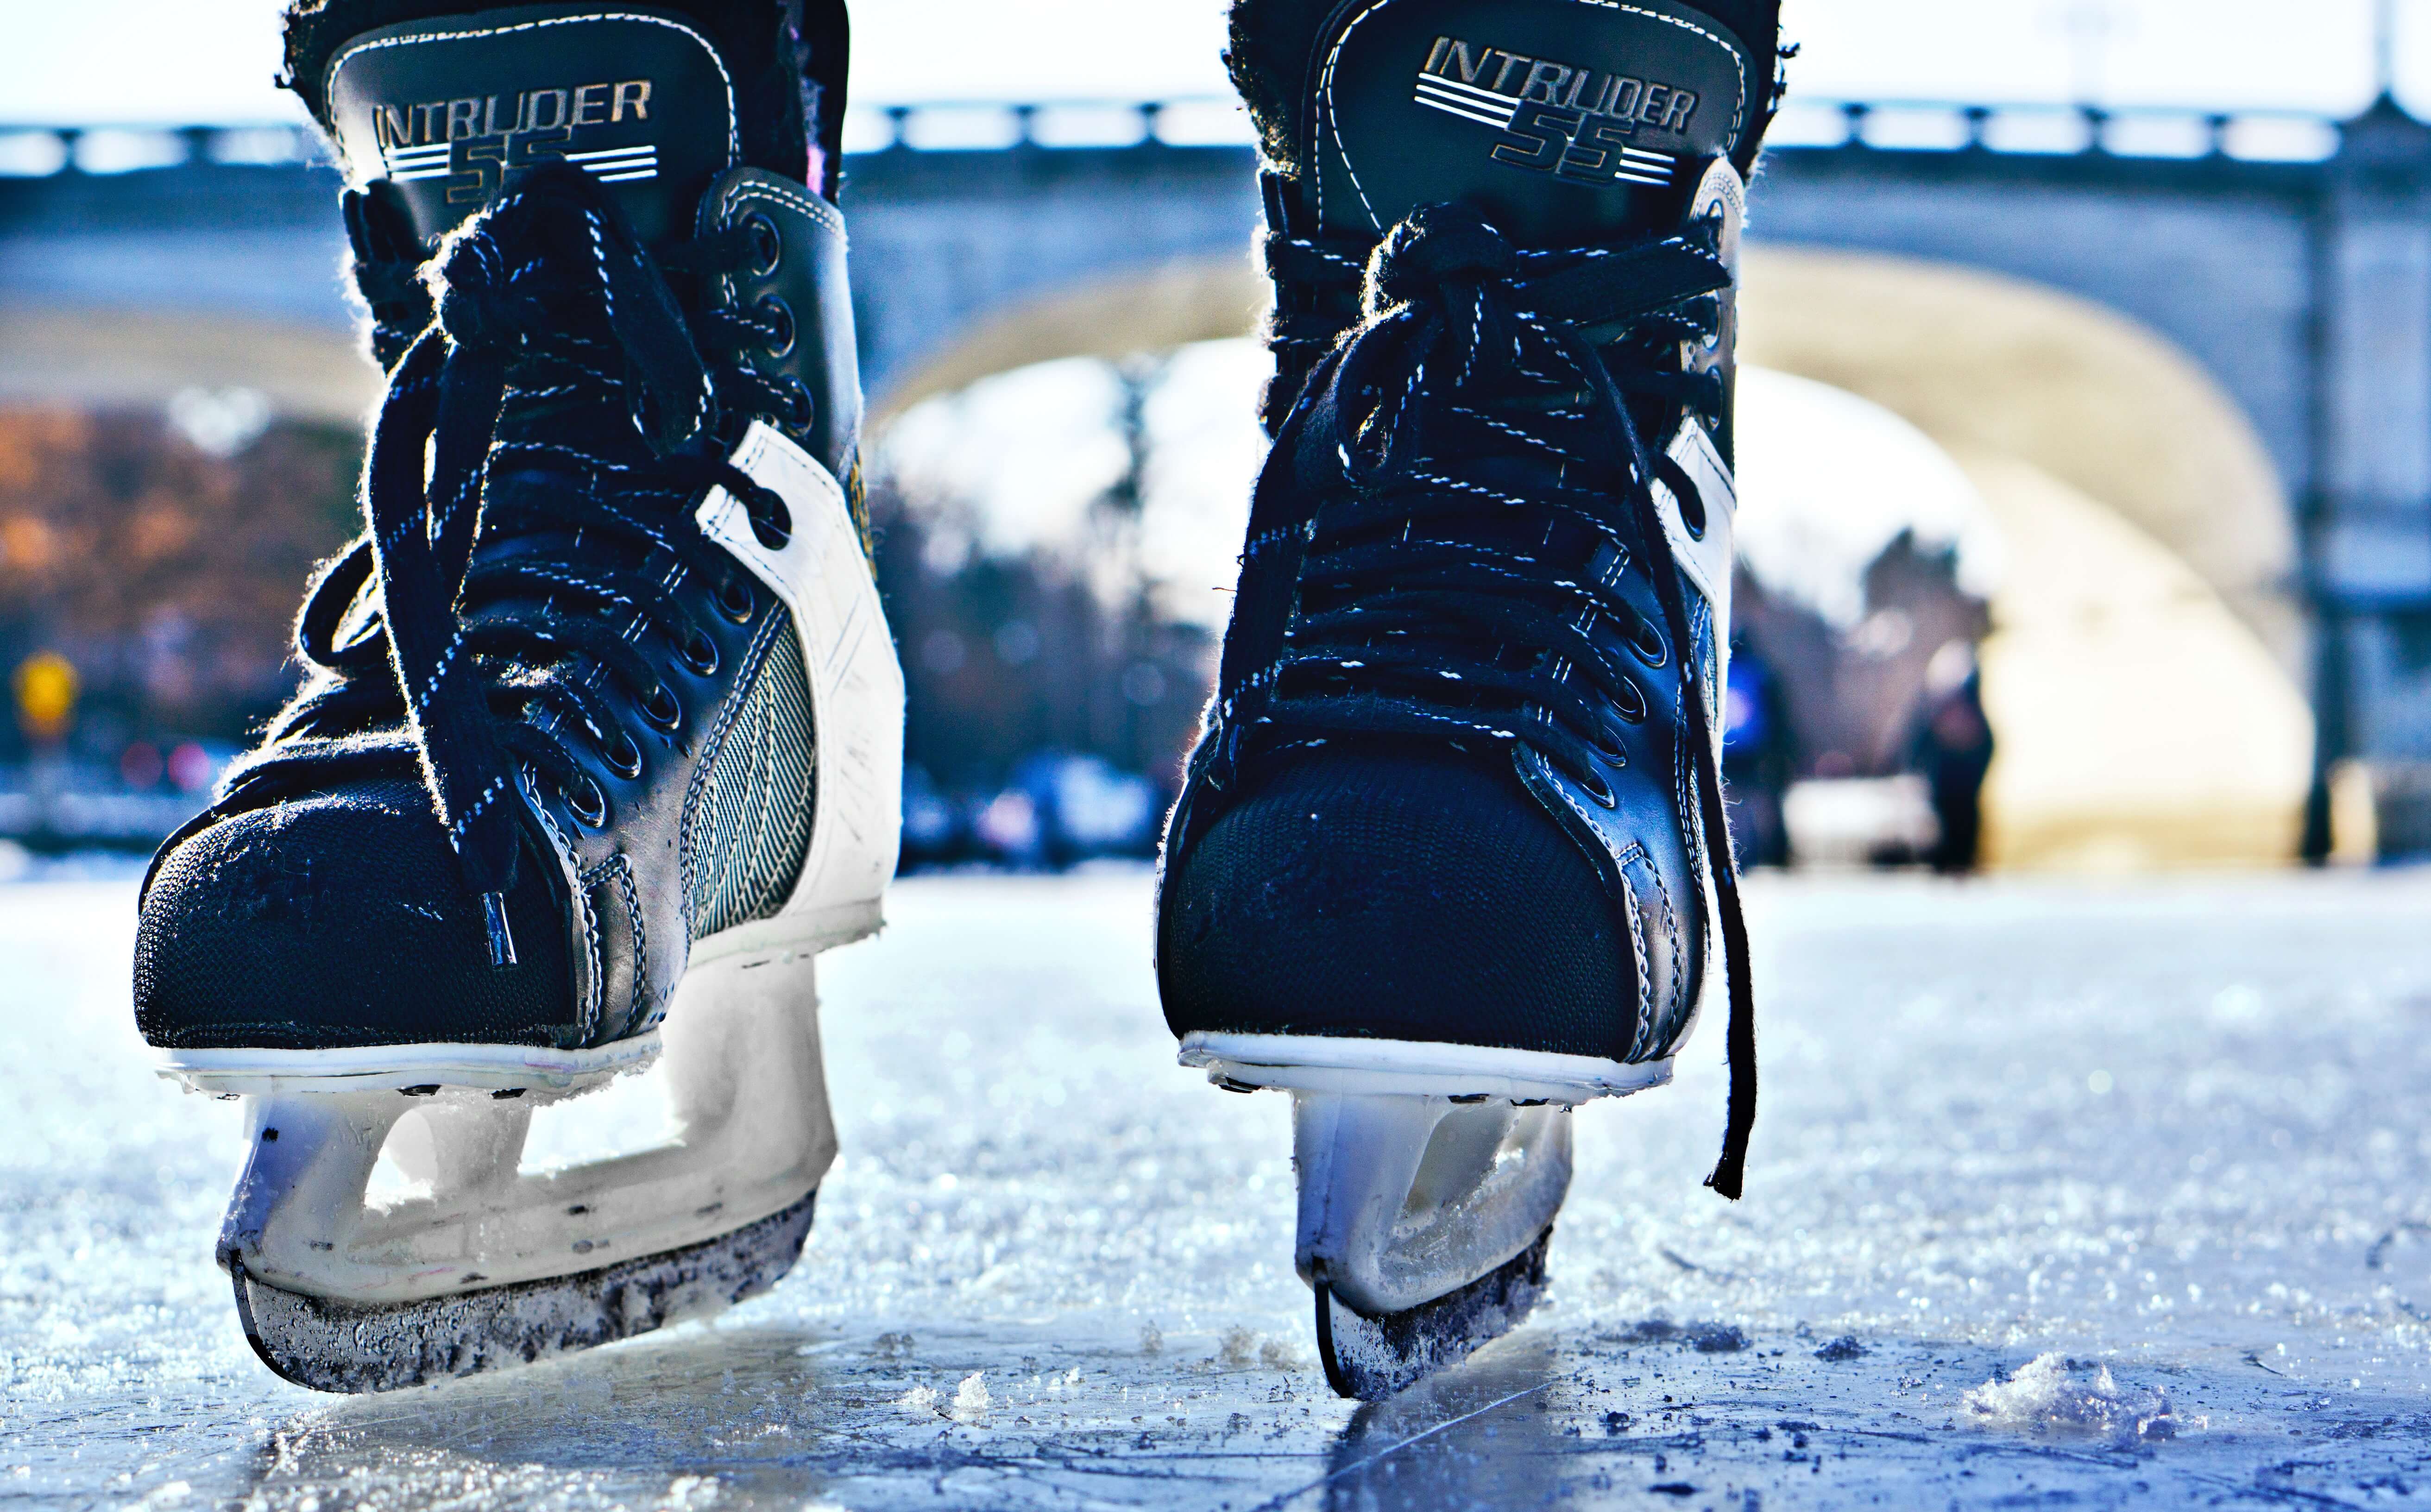 Pair of ice skates standing on ice.